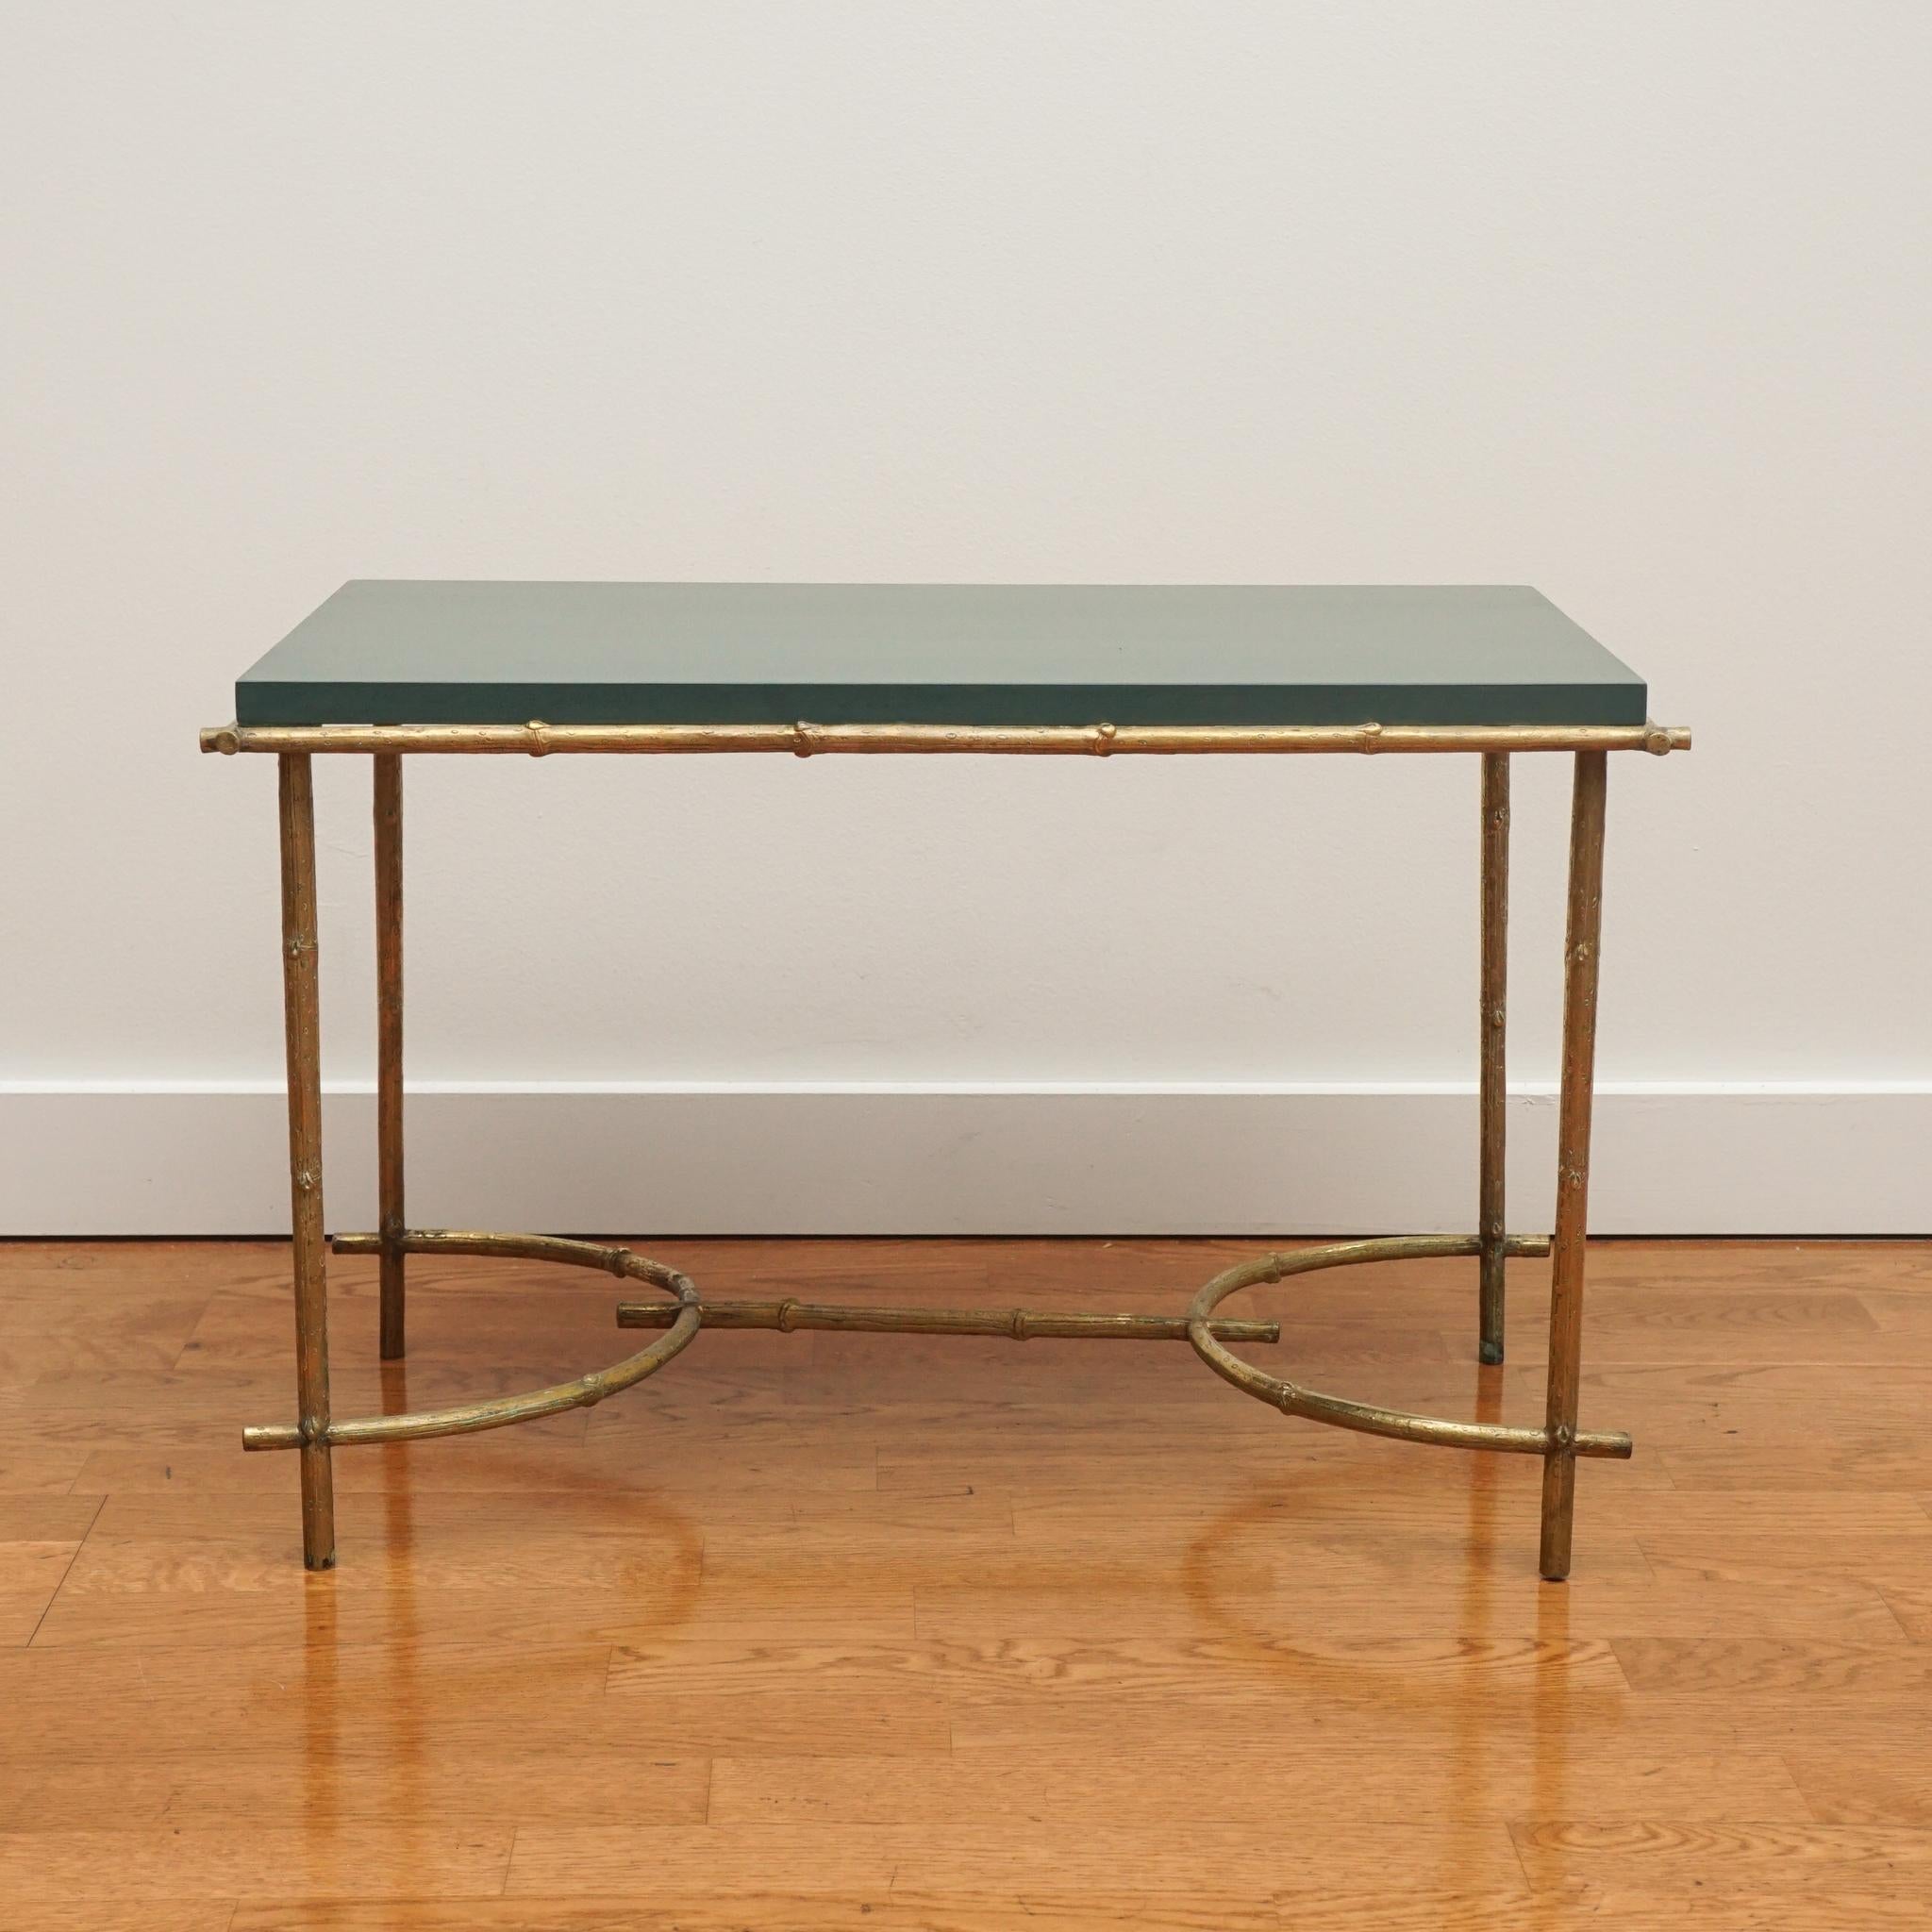 Made in the 1940s, this French neoclassical-style faux bamboo coffee table is a real jewel with its brass finished legs and stretcher and newly lacquered green table top.  If you are looking to add style and color to your home, this is the coffee